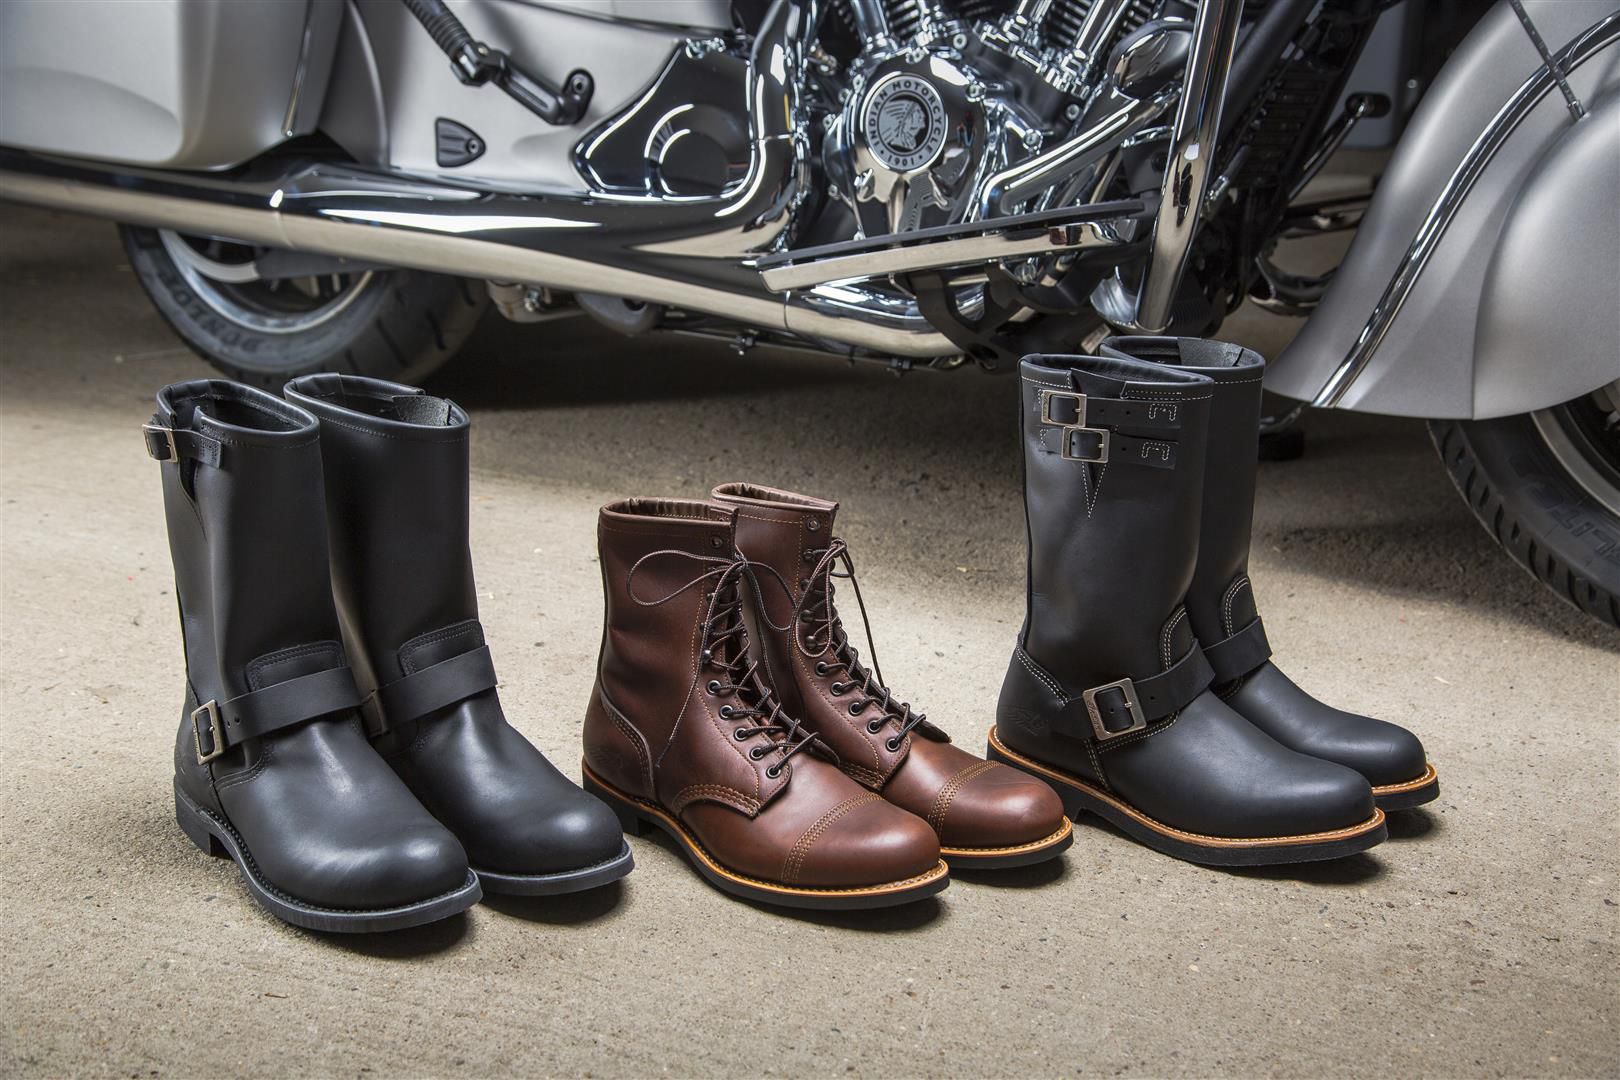 uhyre Politistation Bær Red Wing Motorcycle Boots by Indian | Cycle World